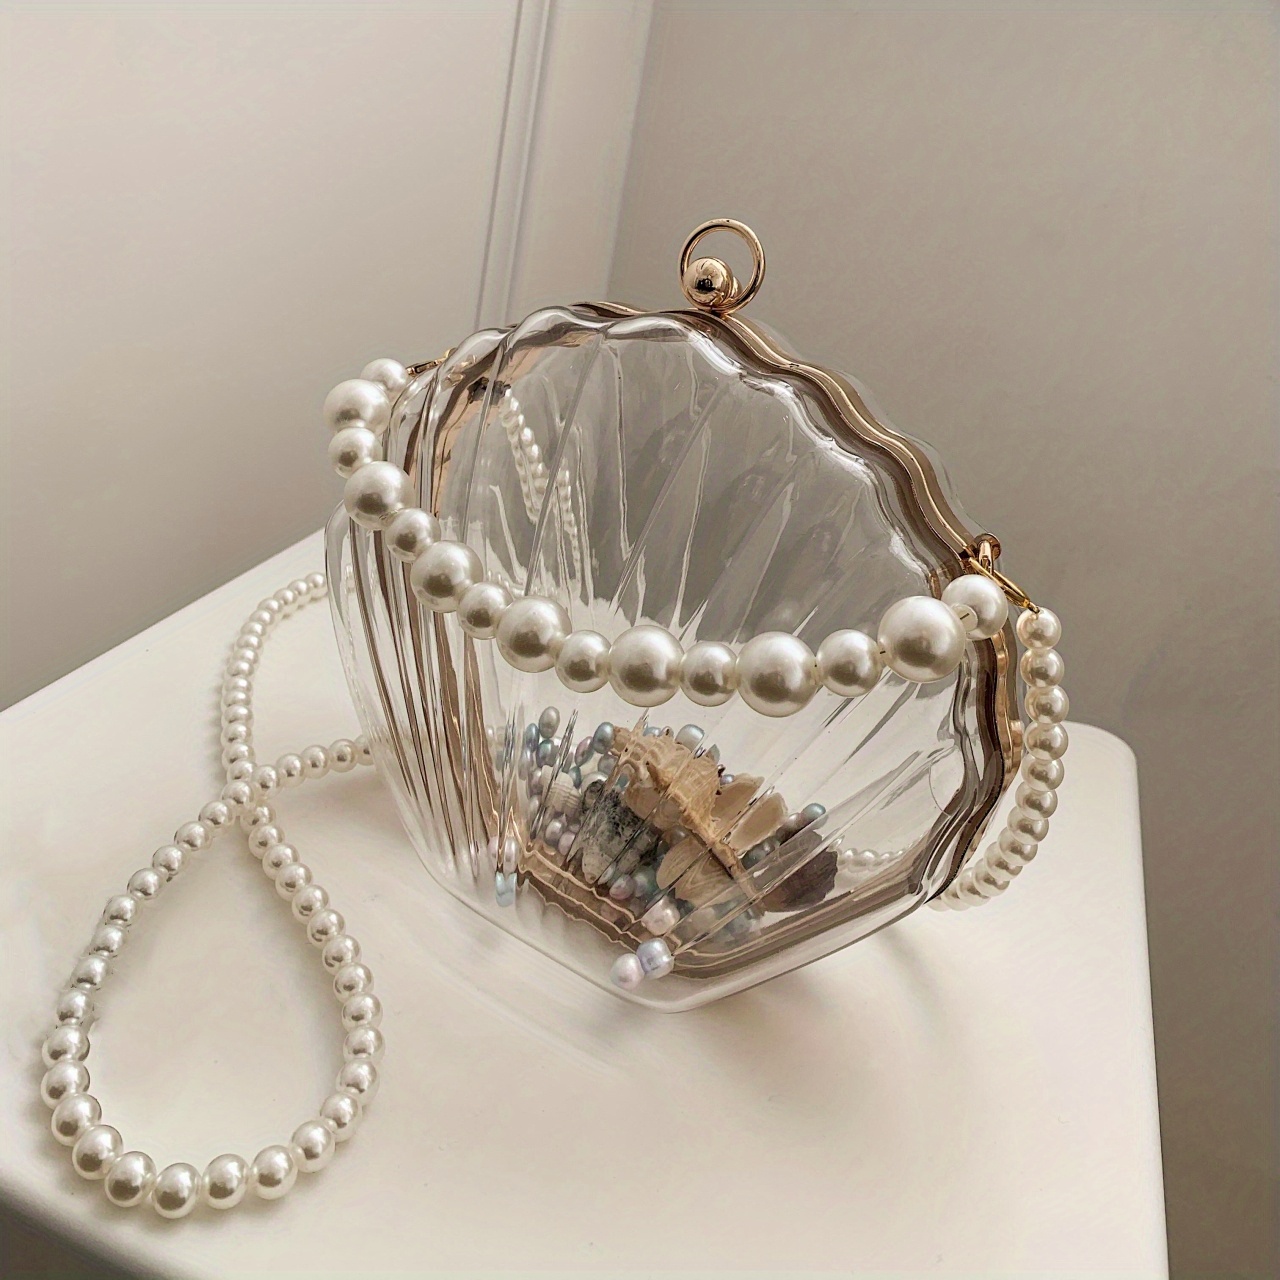 JQWYGB Clear Crossbody Purse for Women Concert Stadium Approved